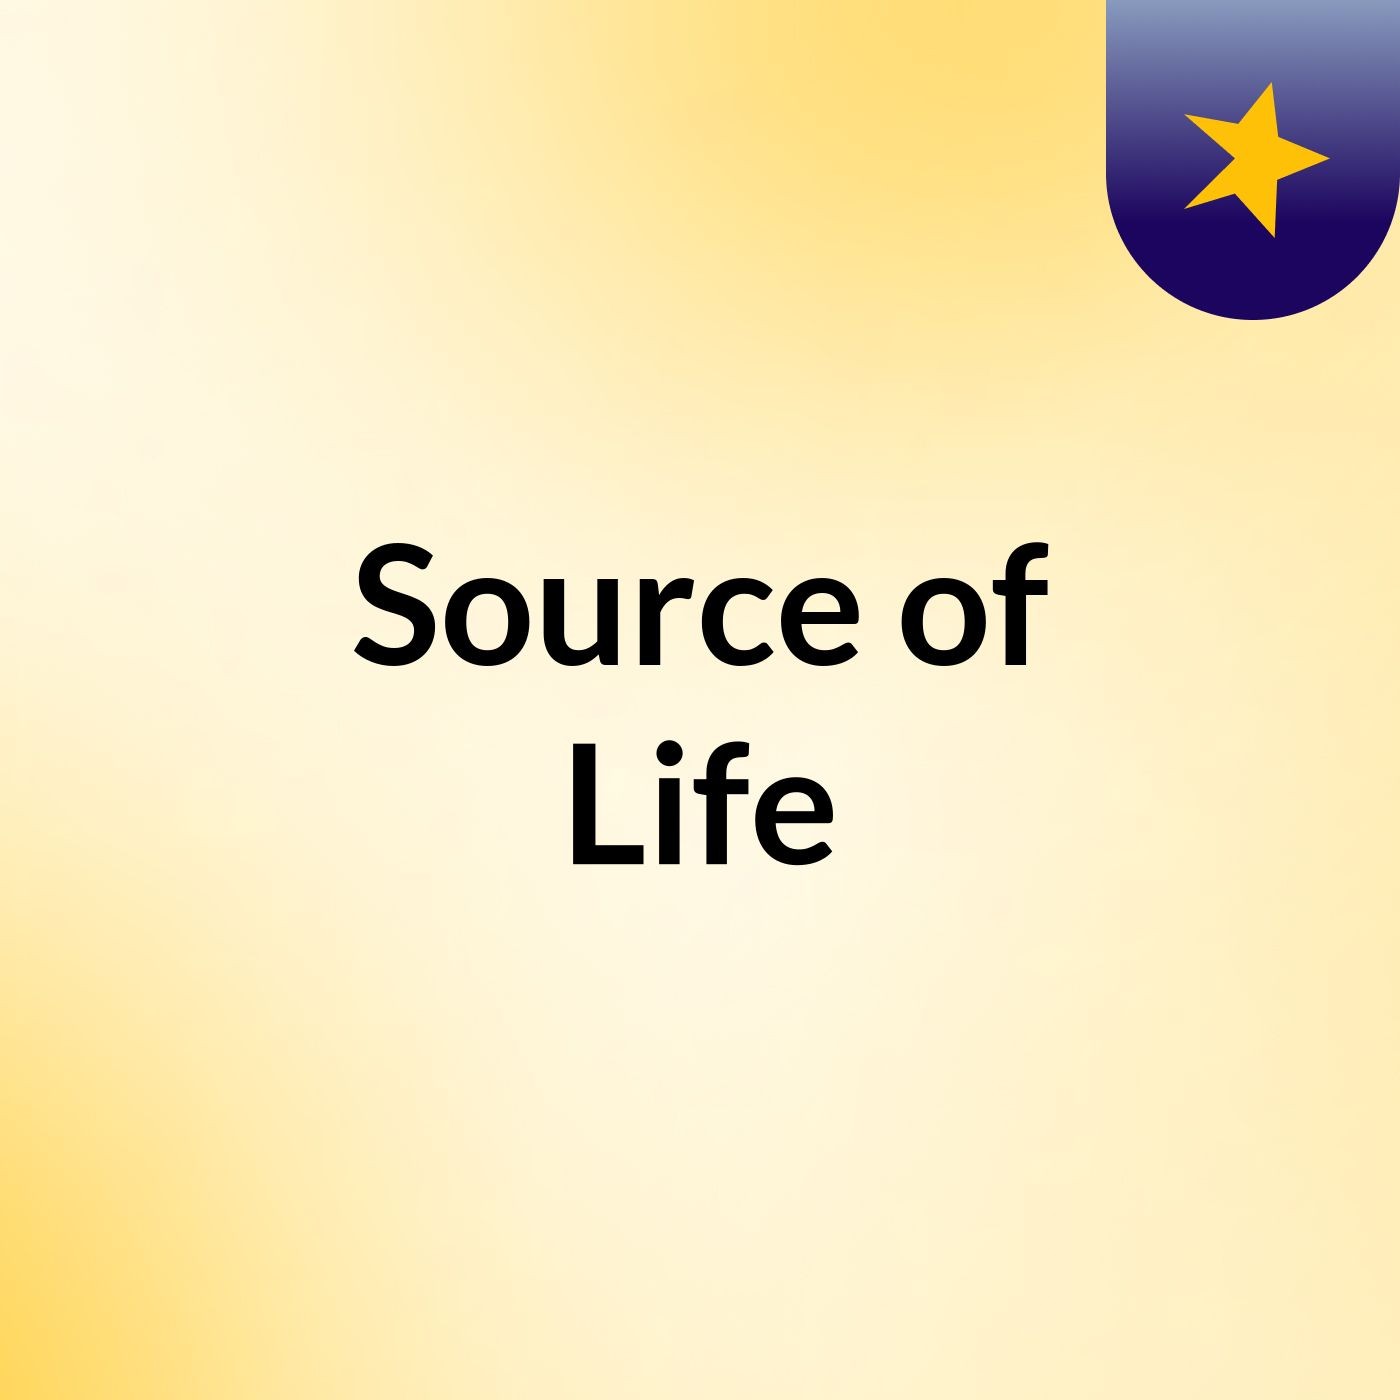 Source of Life